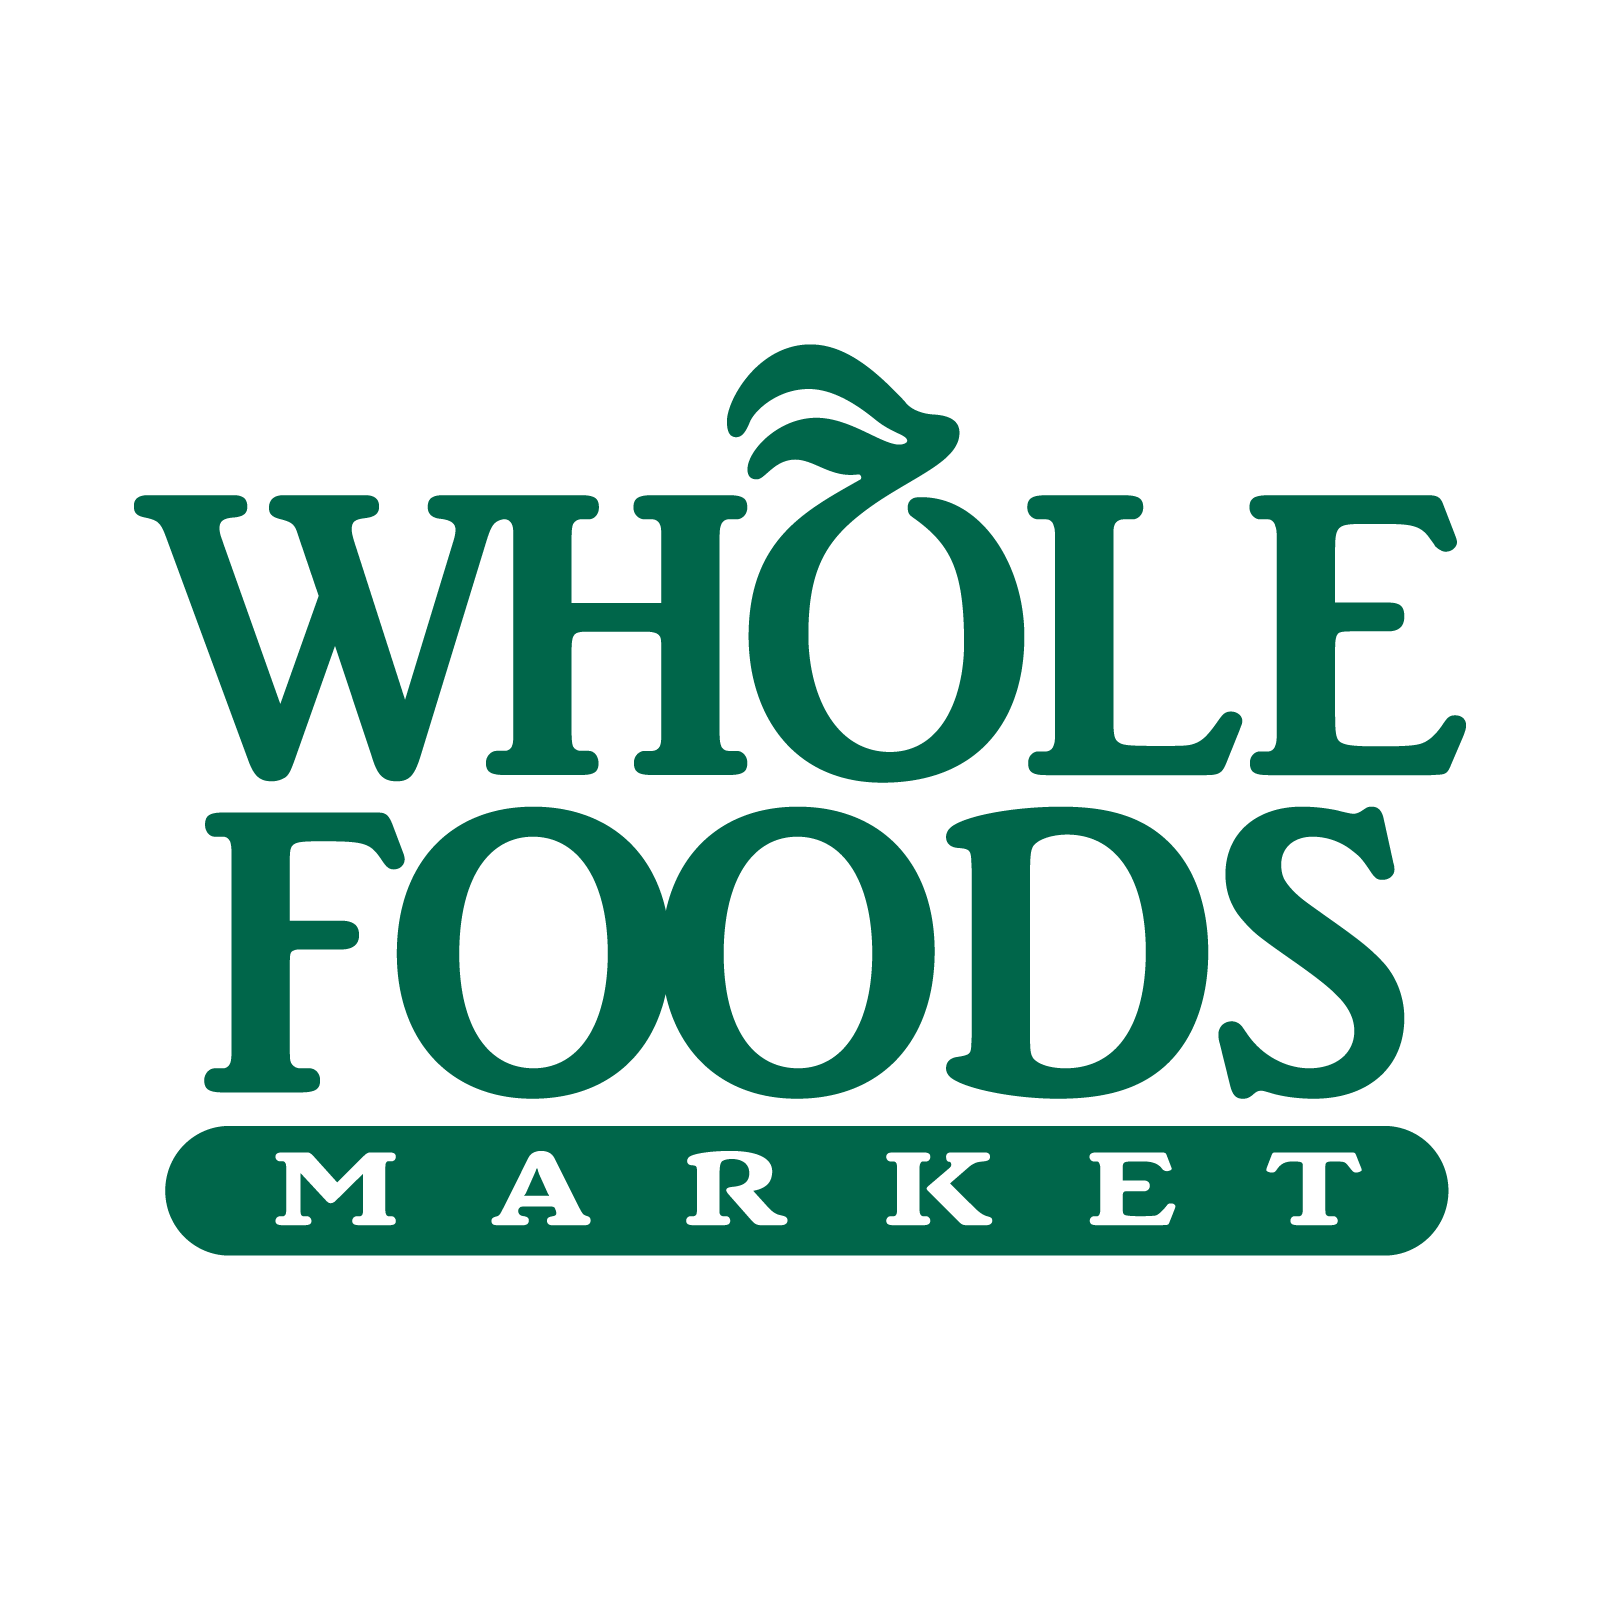 Shop Spero at Whole Foods Market